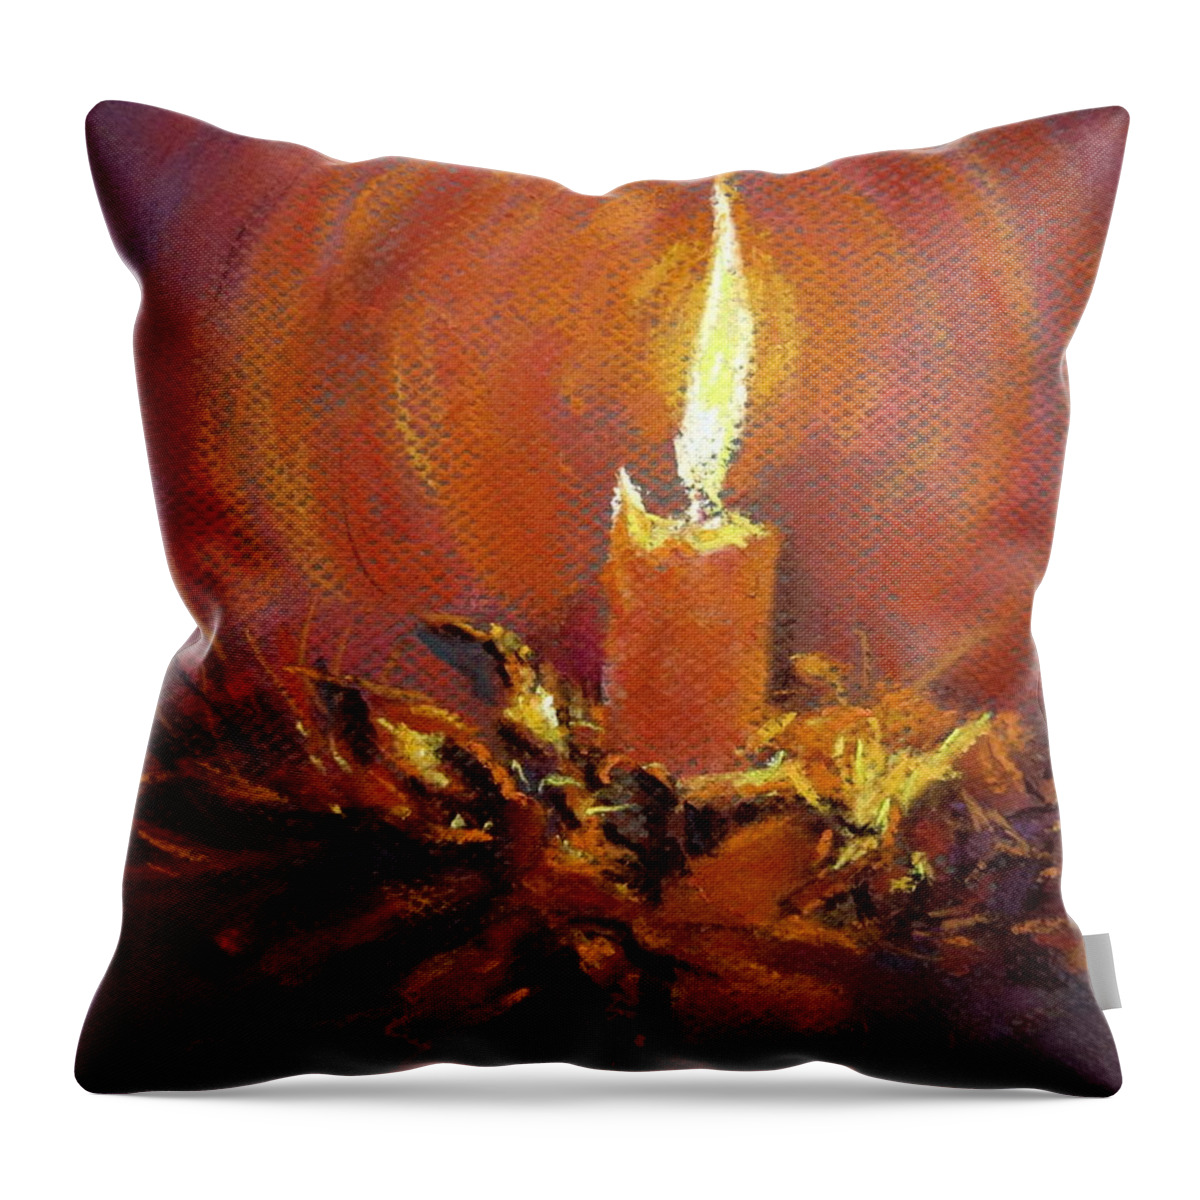 Candelight Throw Pillow featuring the painting Candlelight by Jieming Wang